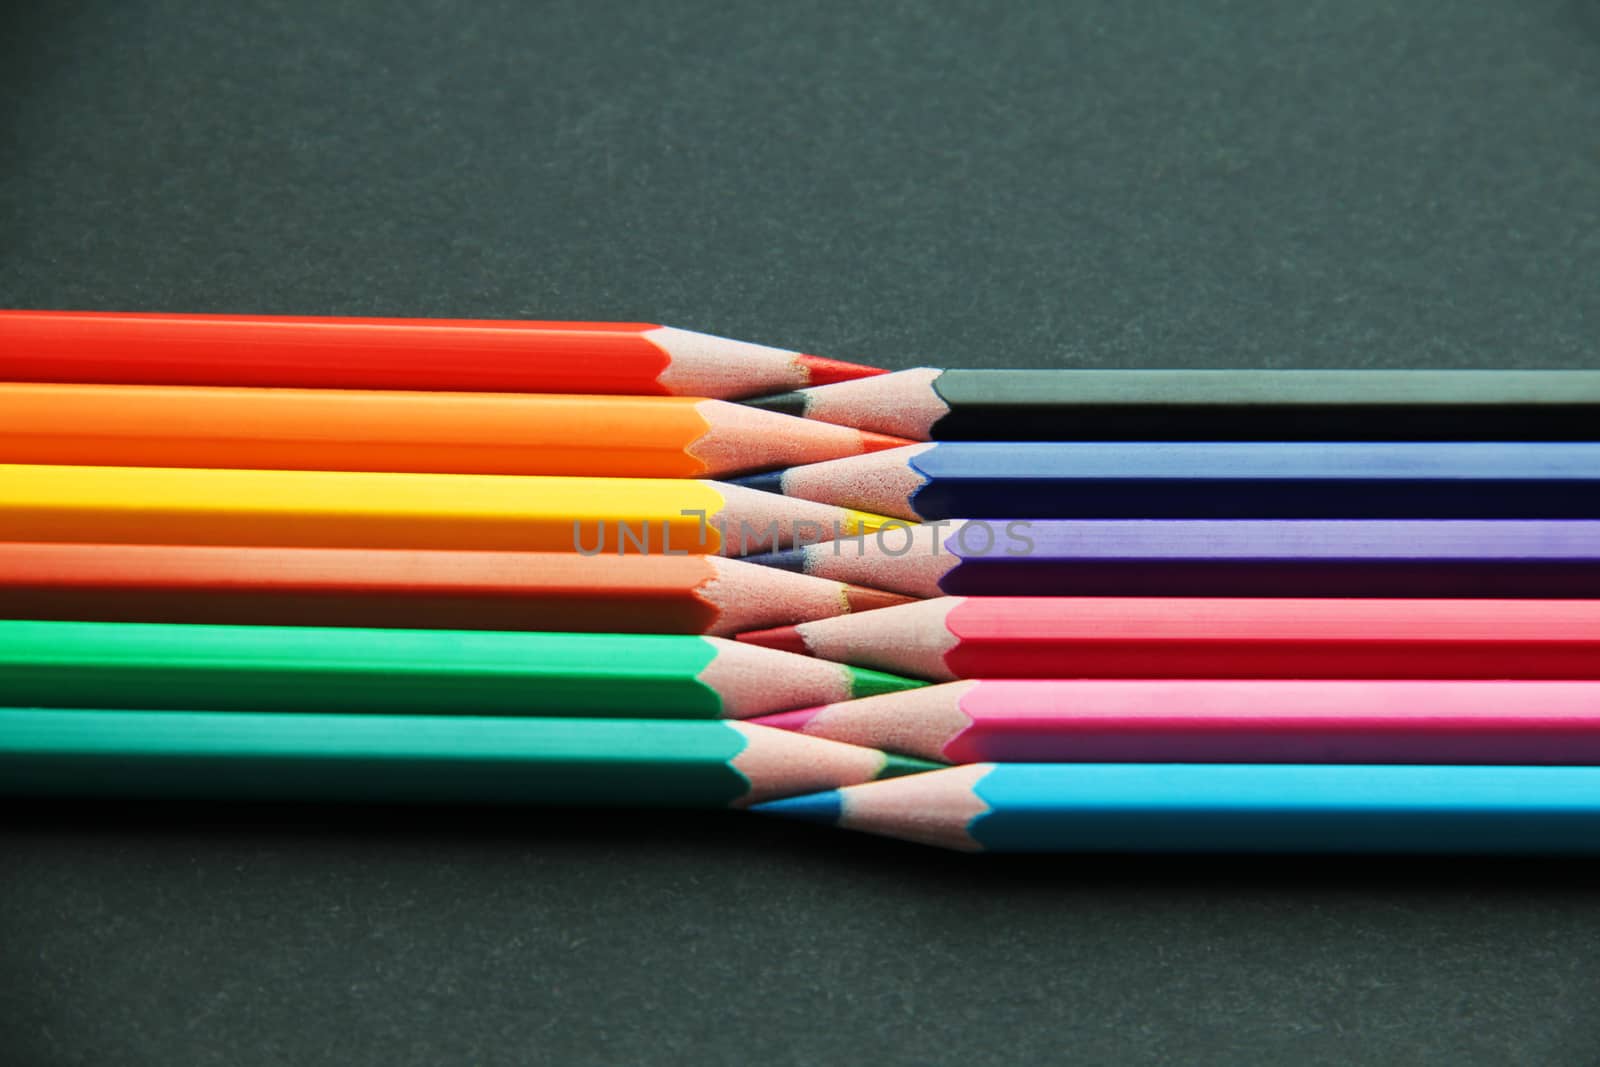 Pencils of different colors close up by Voinakh